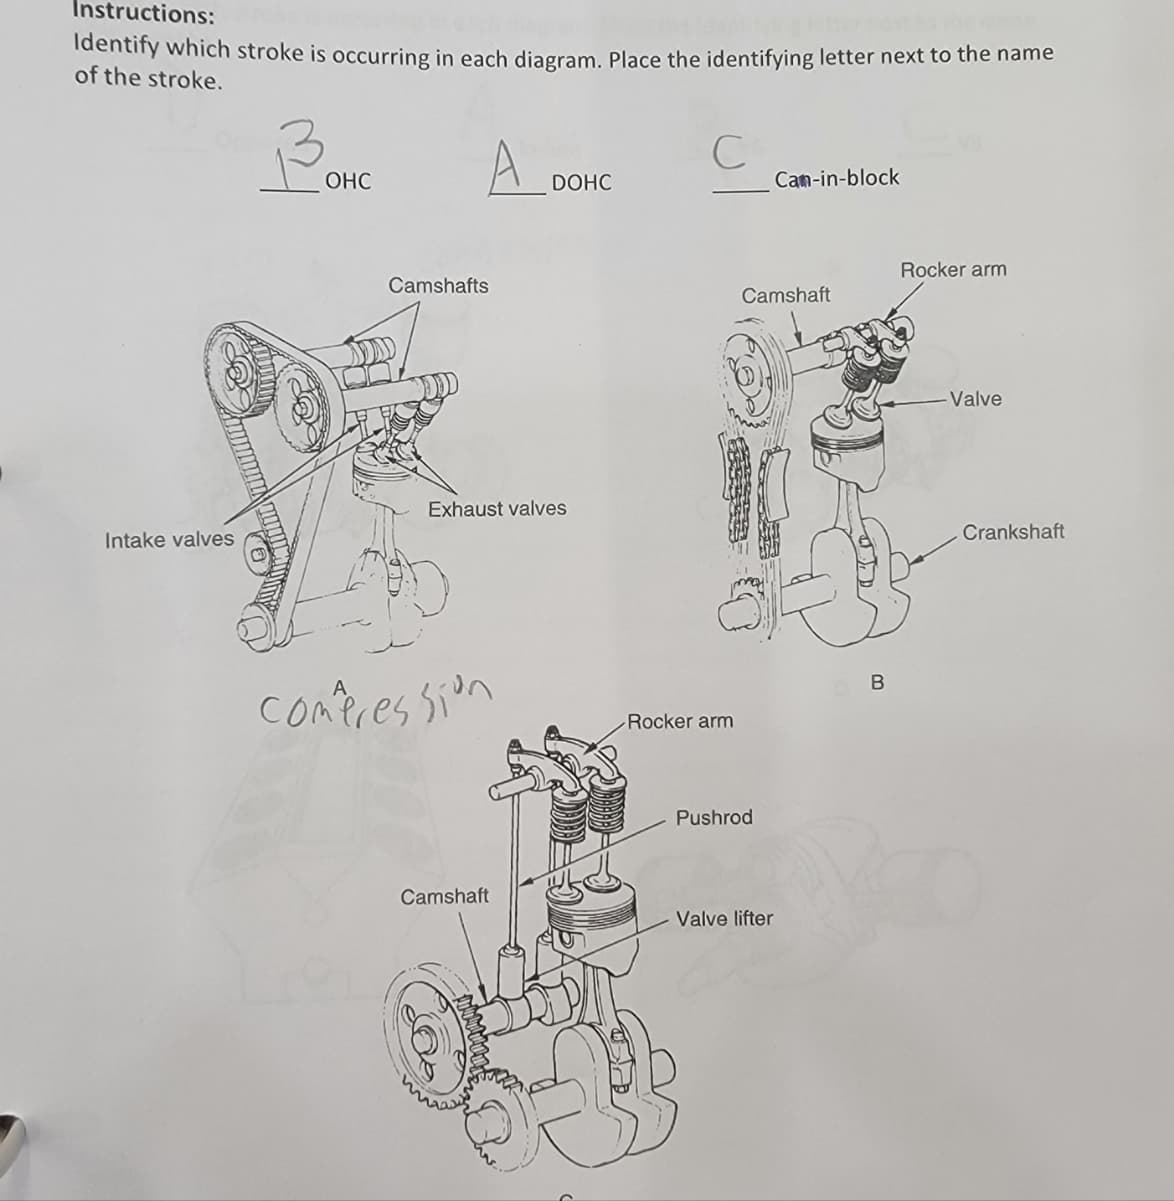 Instructions:
identify which stroke is occurring in each diagram. Place the identifying letter next to the name
of the stroke.
A DOHC
ОНС
Can-in-block
Rocker arm
Camshafts
Camshaft
Valve
Exhaust valves
Crankshaft
Intake valves
comeres sion
Rocker arm
Pushrod
Camshaft
Valve lifter
B.
